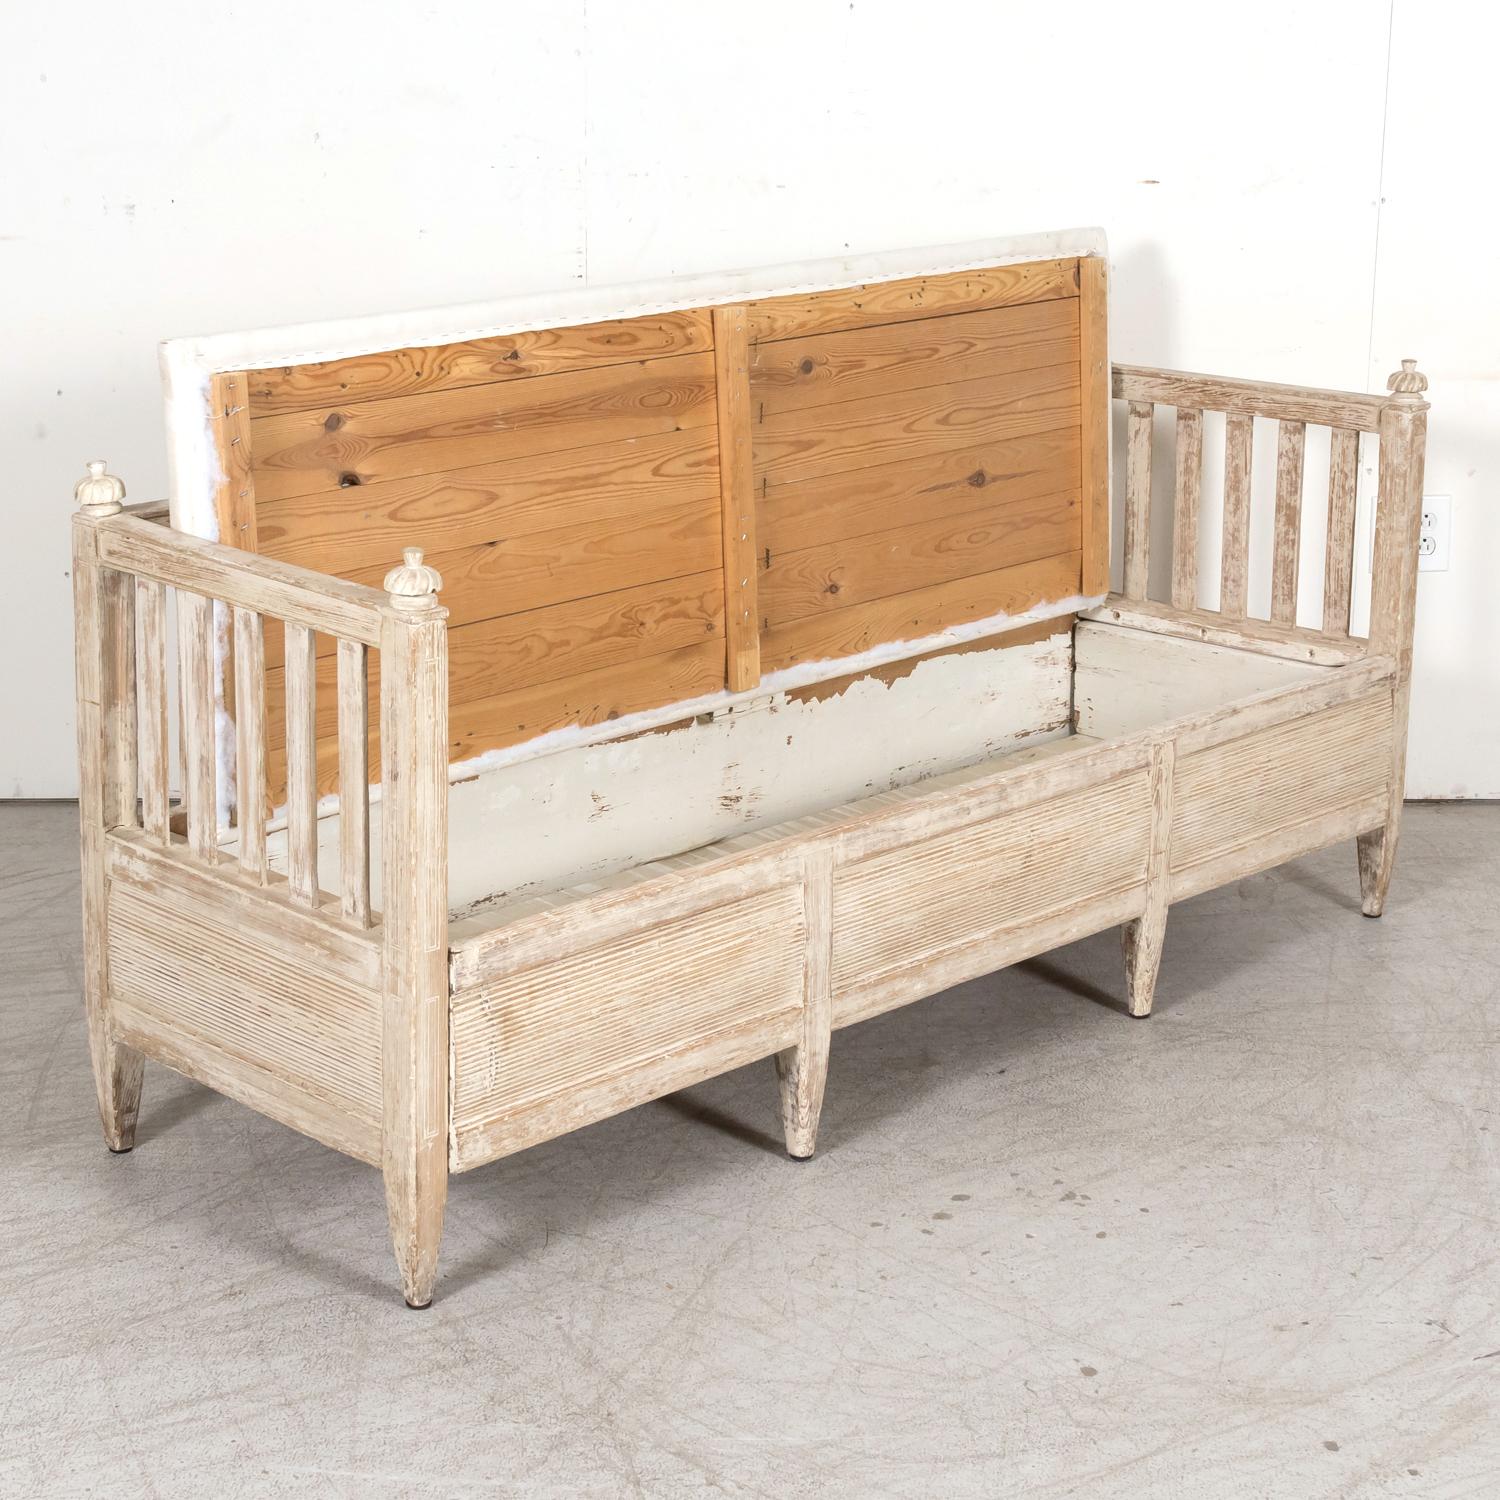 19th Century Swedish Gustavian Style Painted Stickback Sofa Bench with Lift Seat For Sale 6